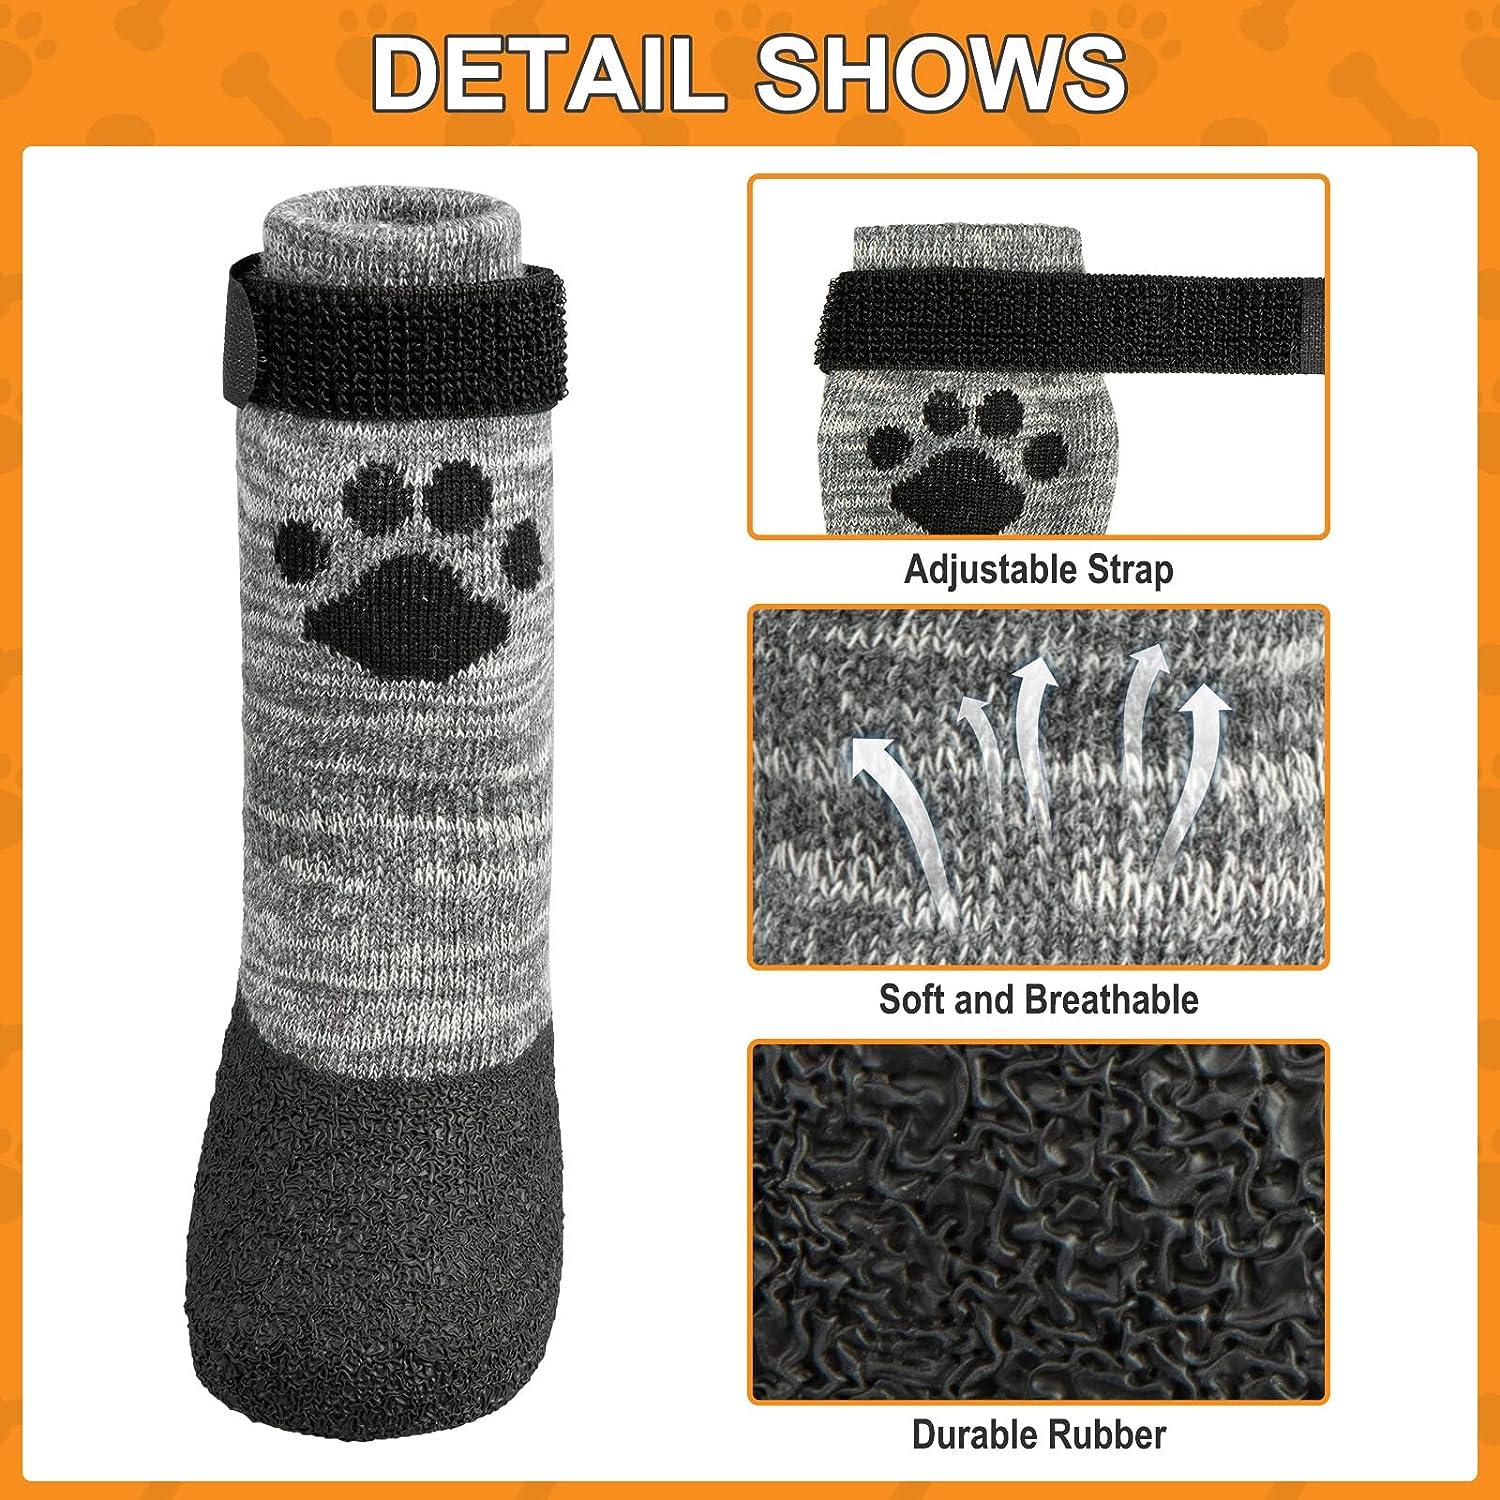 KOOLTAIL Anti-Slip Dog Boots 4 Packs - Adjustable Dog Socks with Shoelace,  Waterproof Dog Sock Shoe for All Seasons, Super Durable Pet Paw Protector